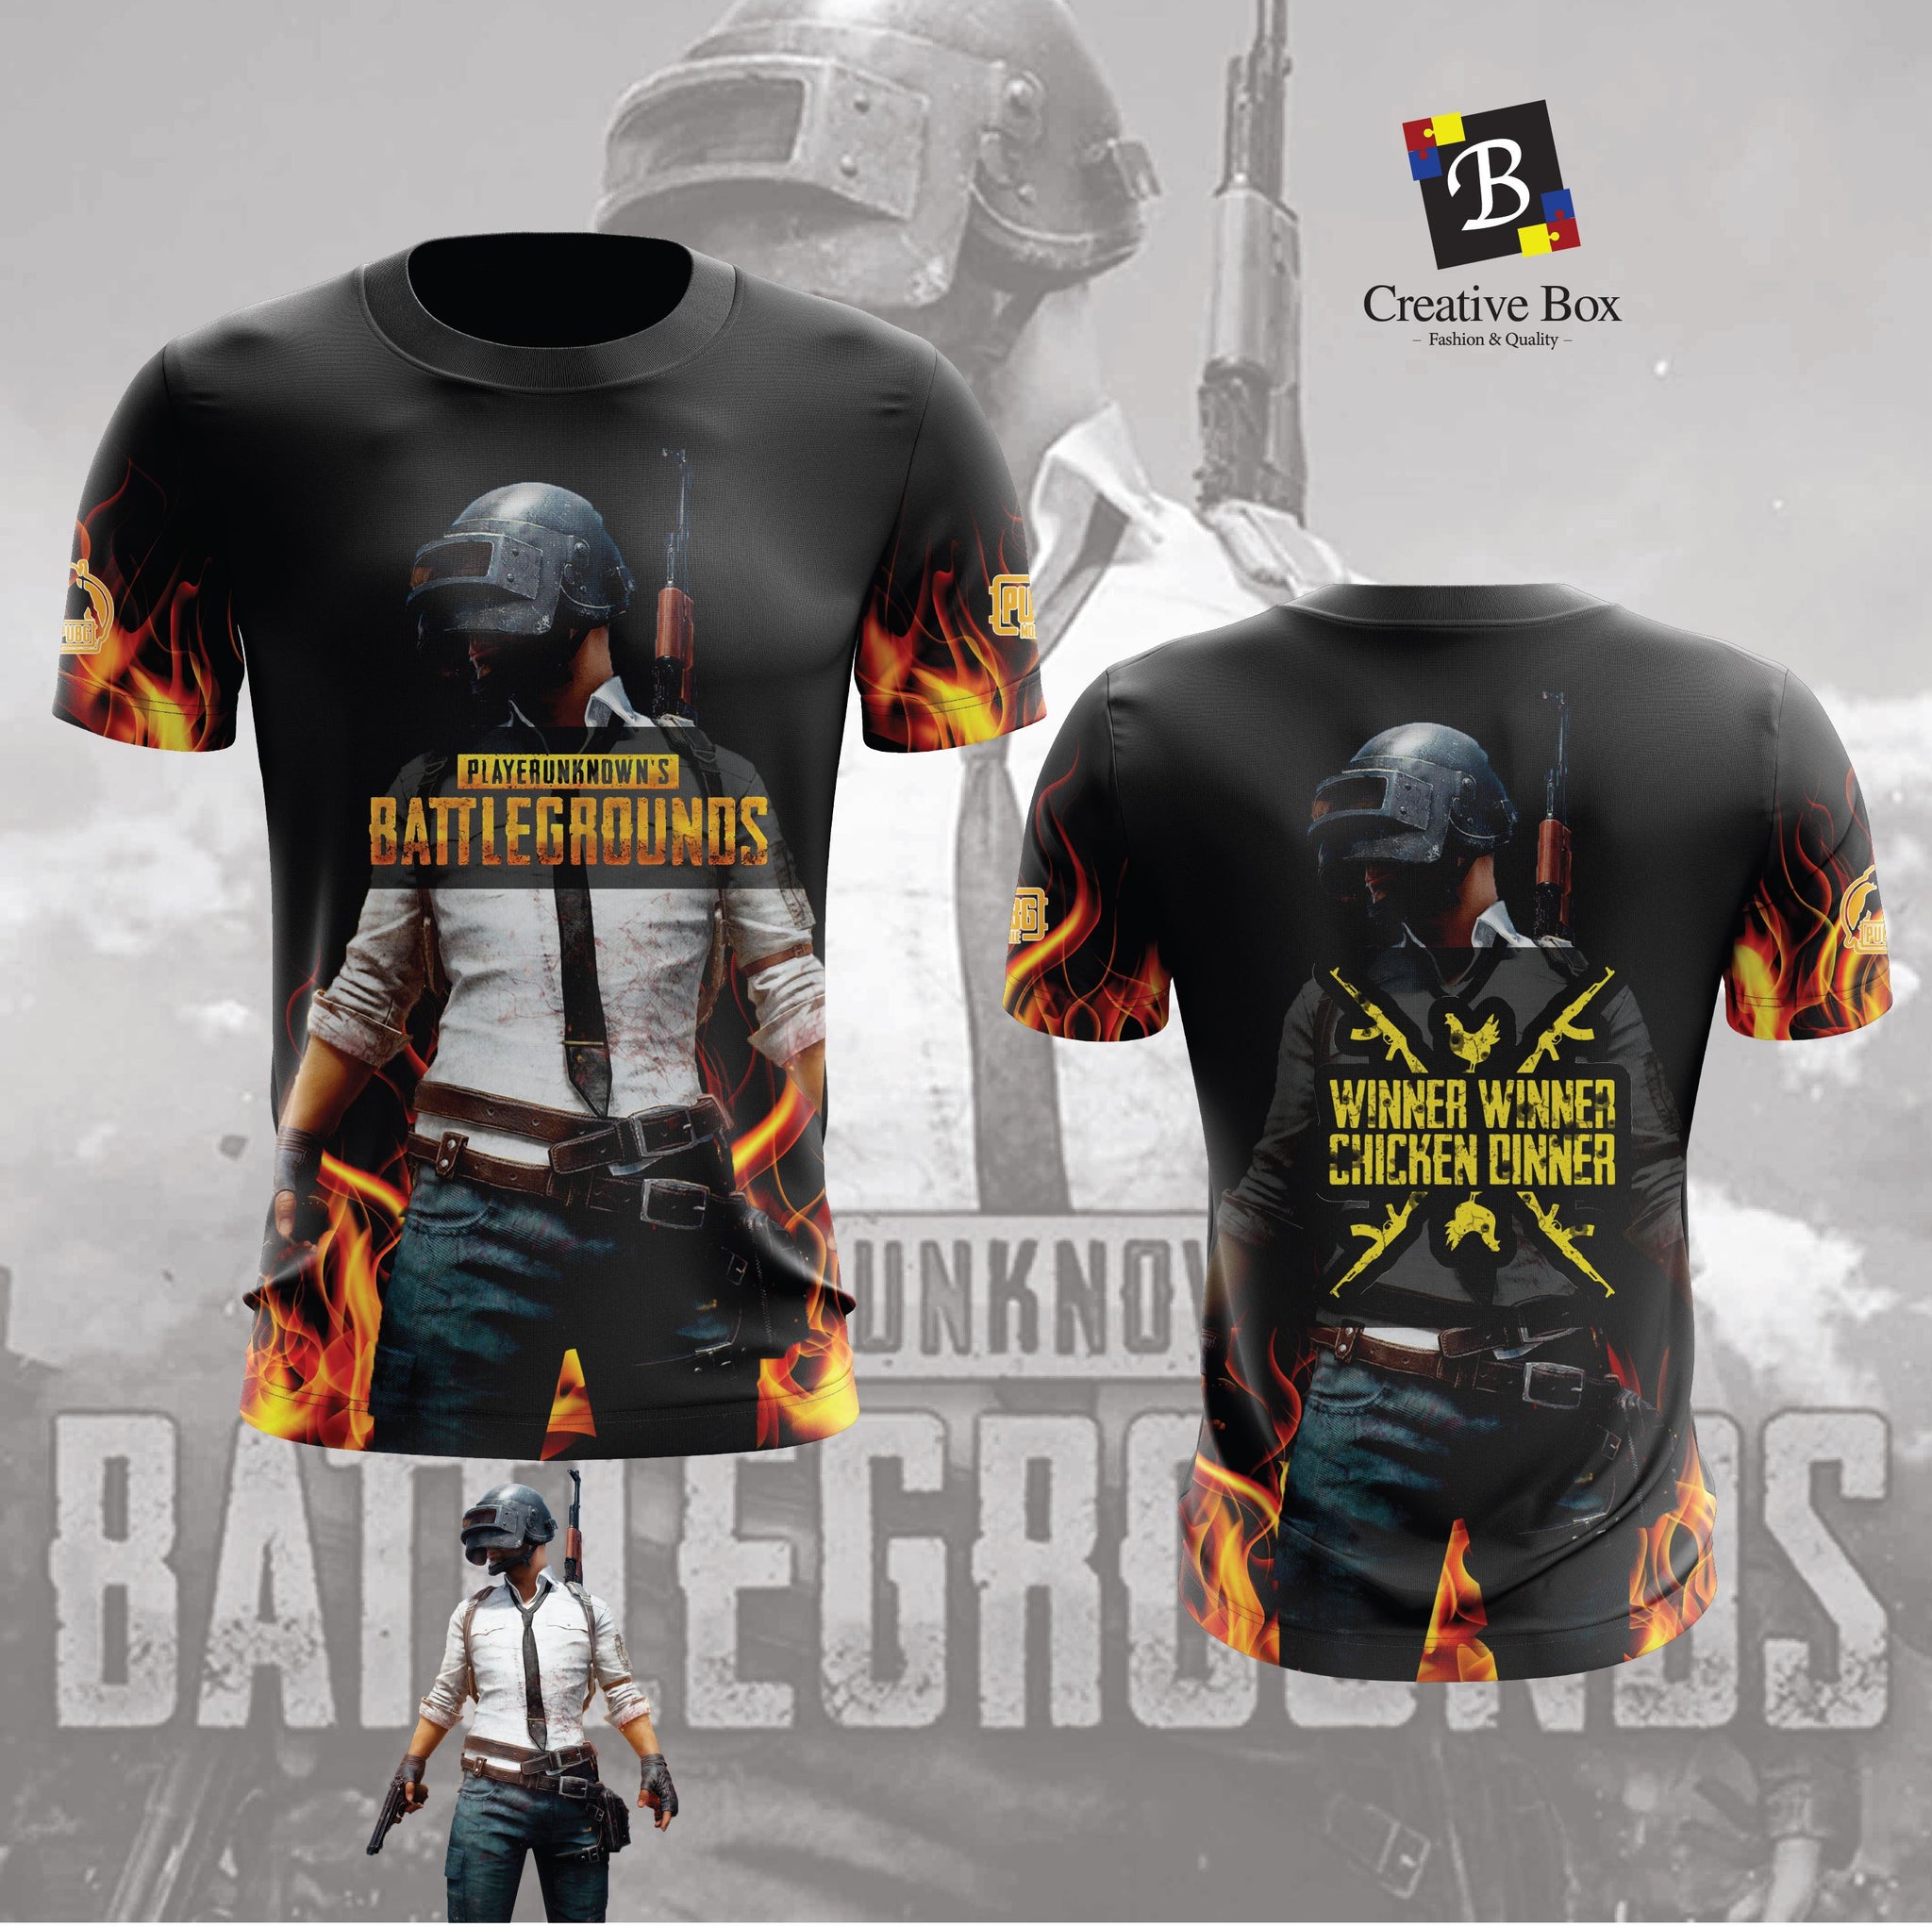 2020 Latest Design Gaming Jacket and Jersey (PUBG)